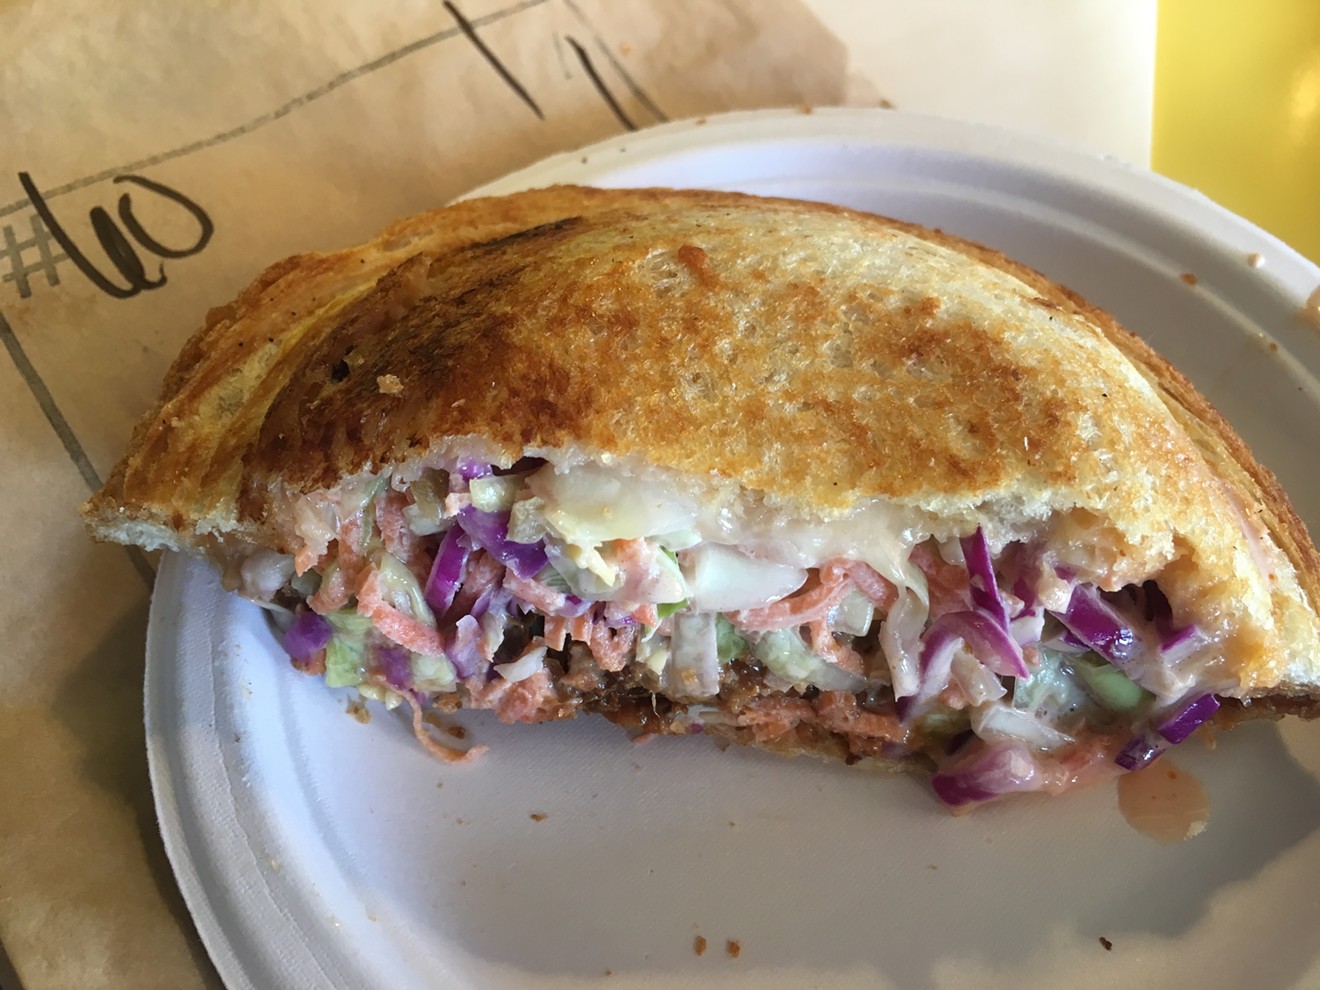 A Zookz stuffed with pulled pork, slaw, and cheese.